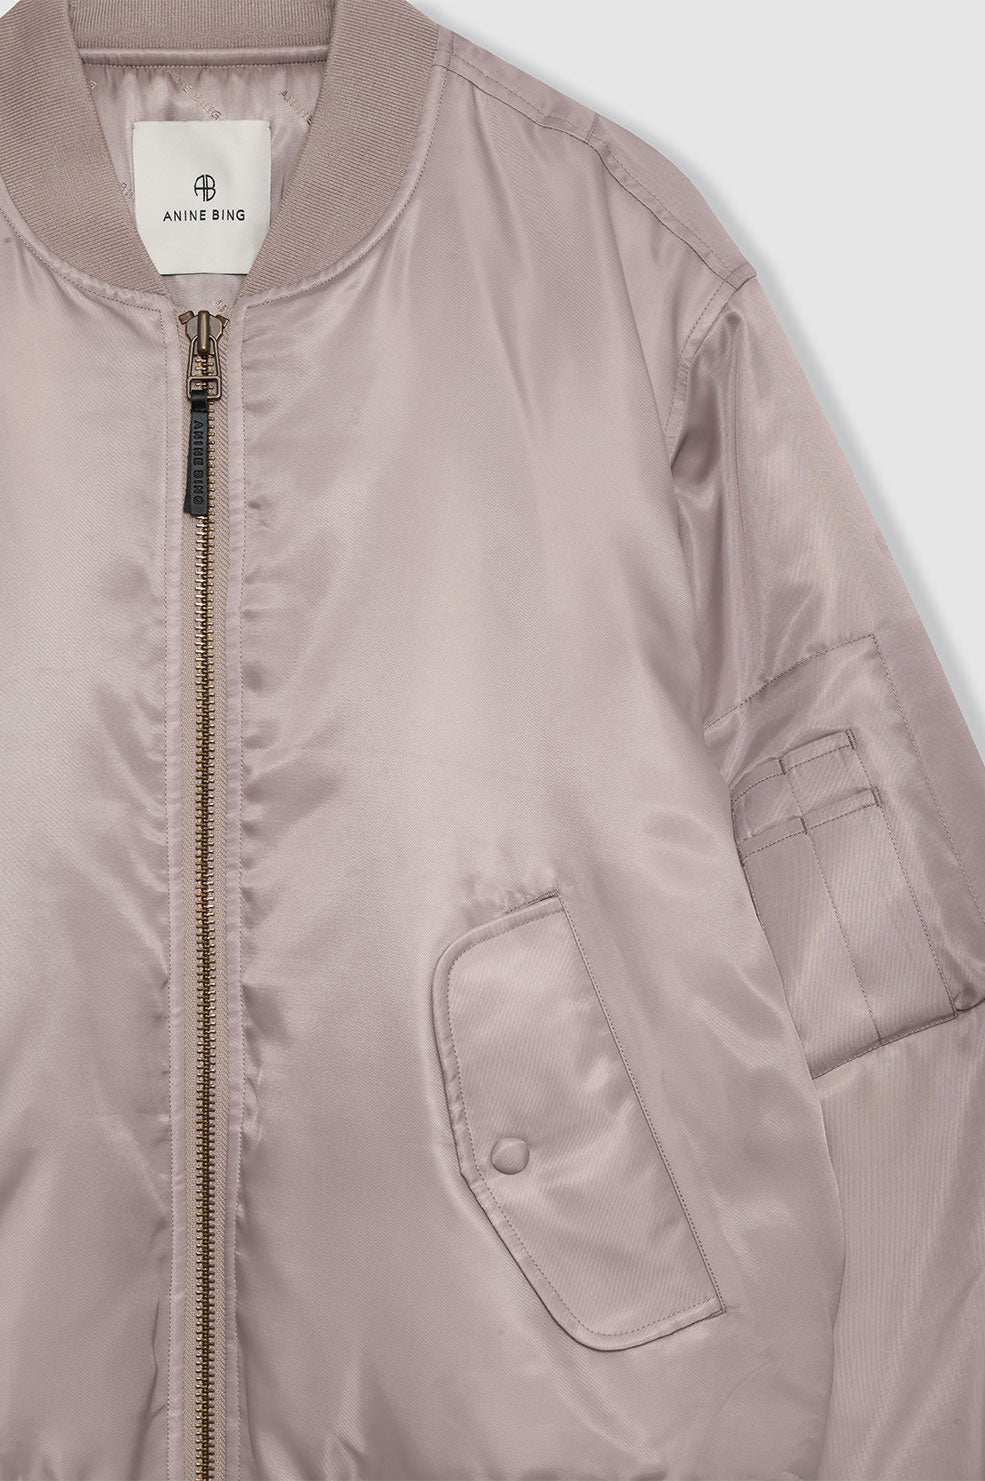 ANINE BING Leon Bomber - Champagne - Detail View